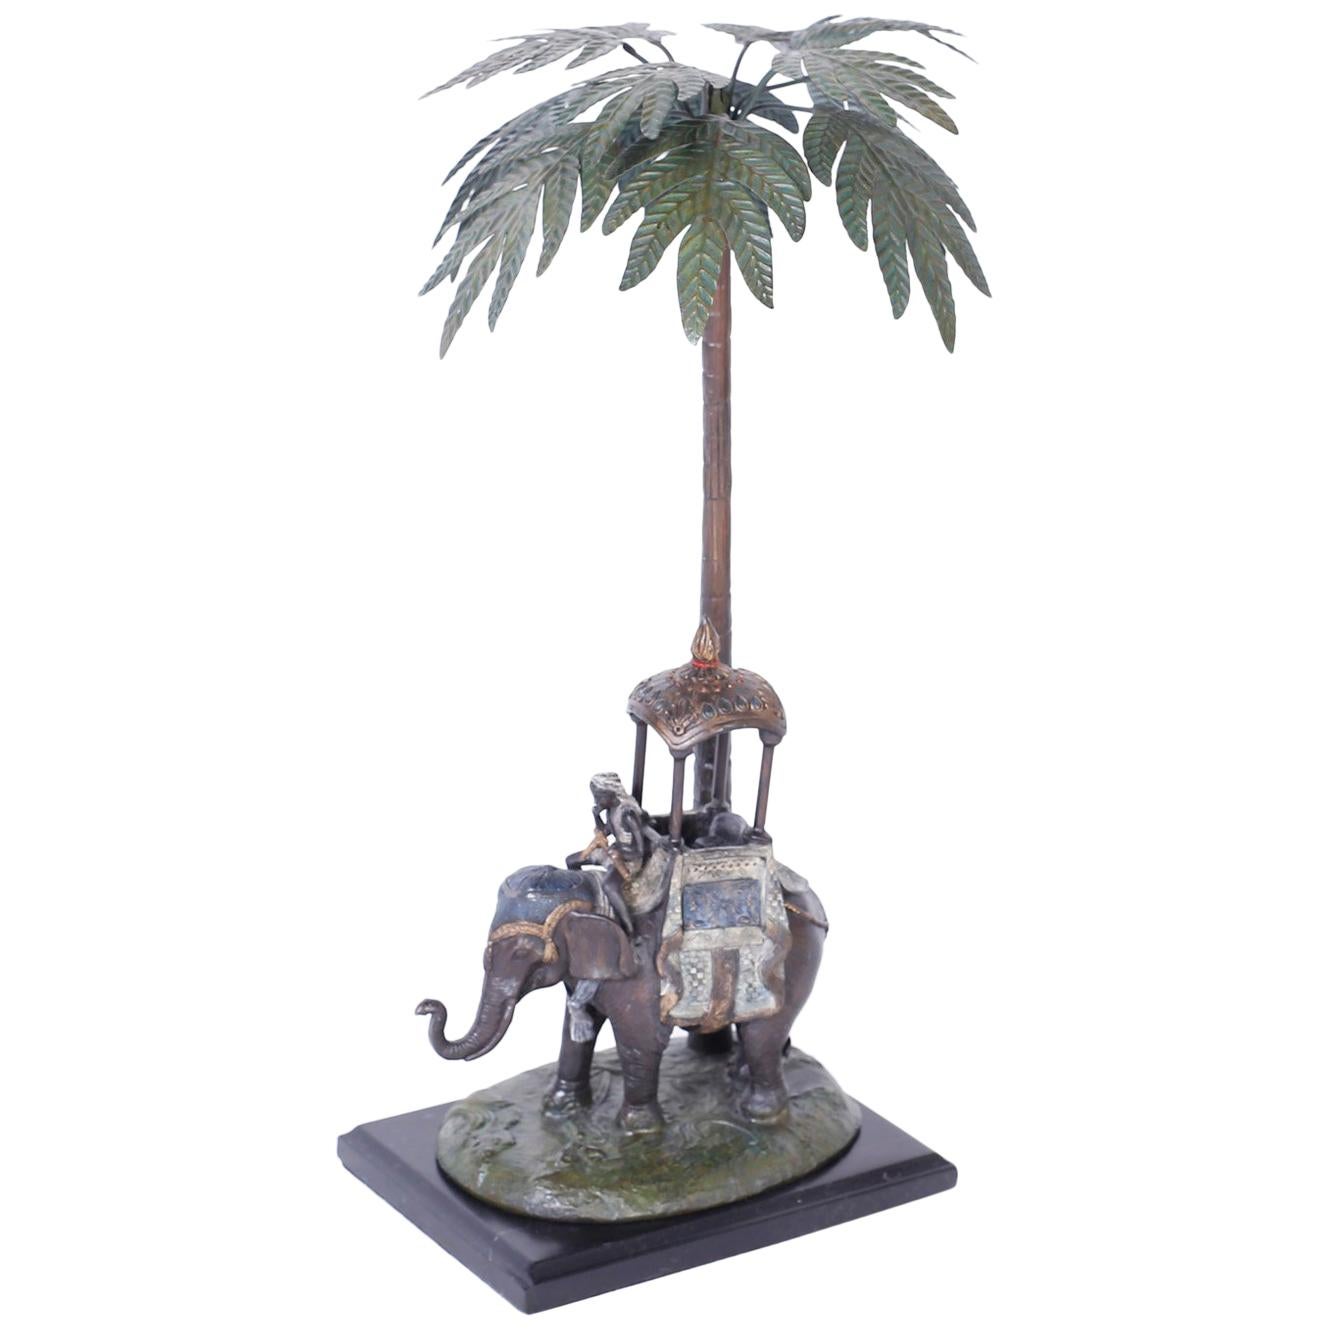 Cold Painted Metal Figure of an Elephant under a Palm Tree